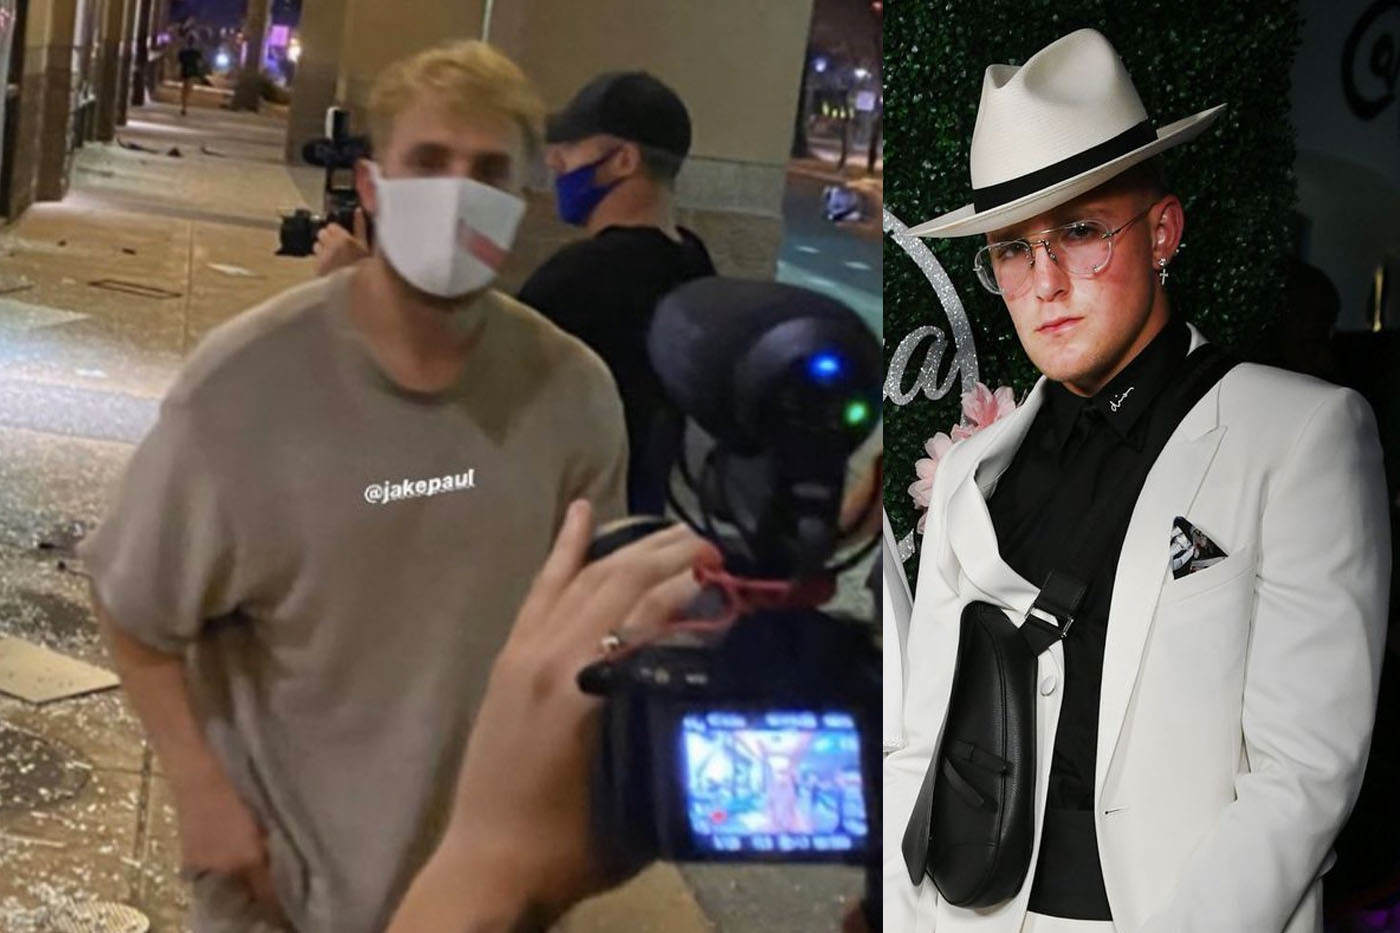 A timeline of Jake Paul scandals: from everyday bro to looting accusations.